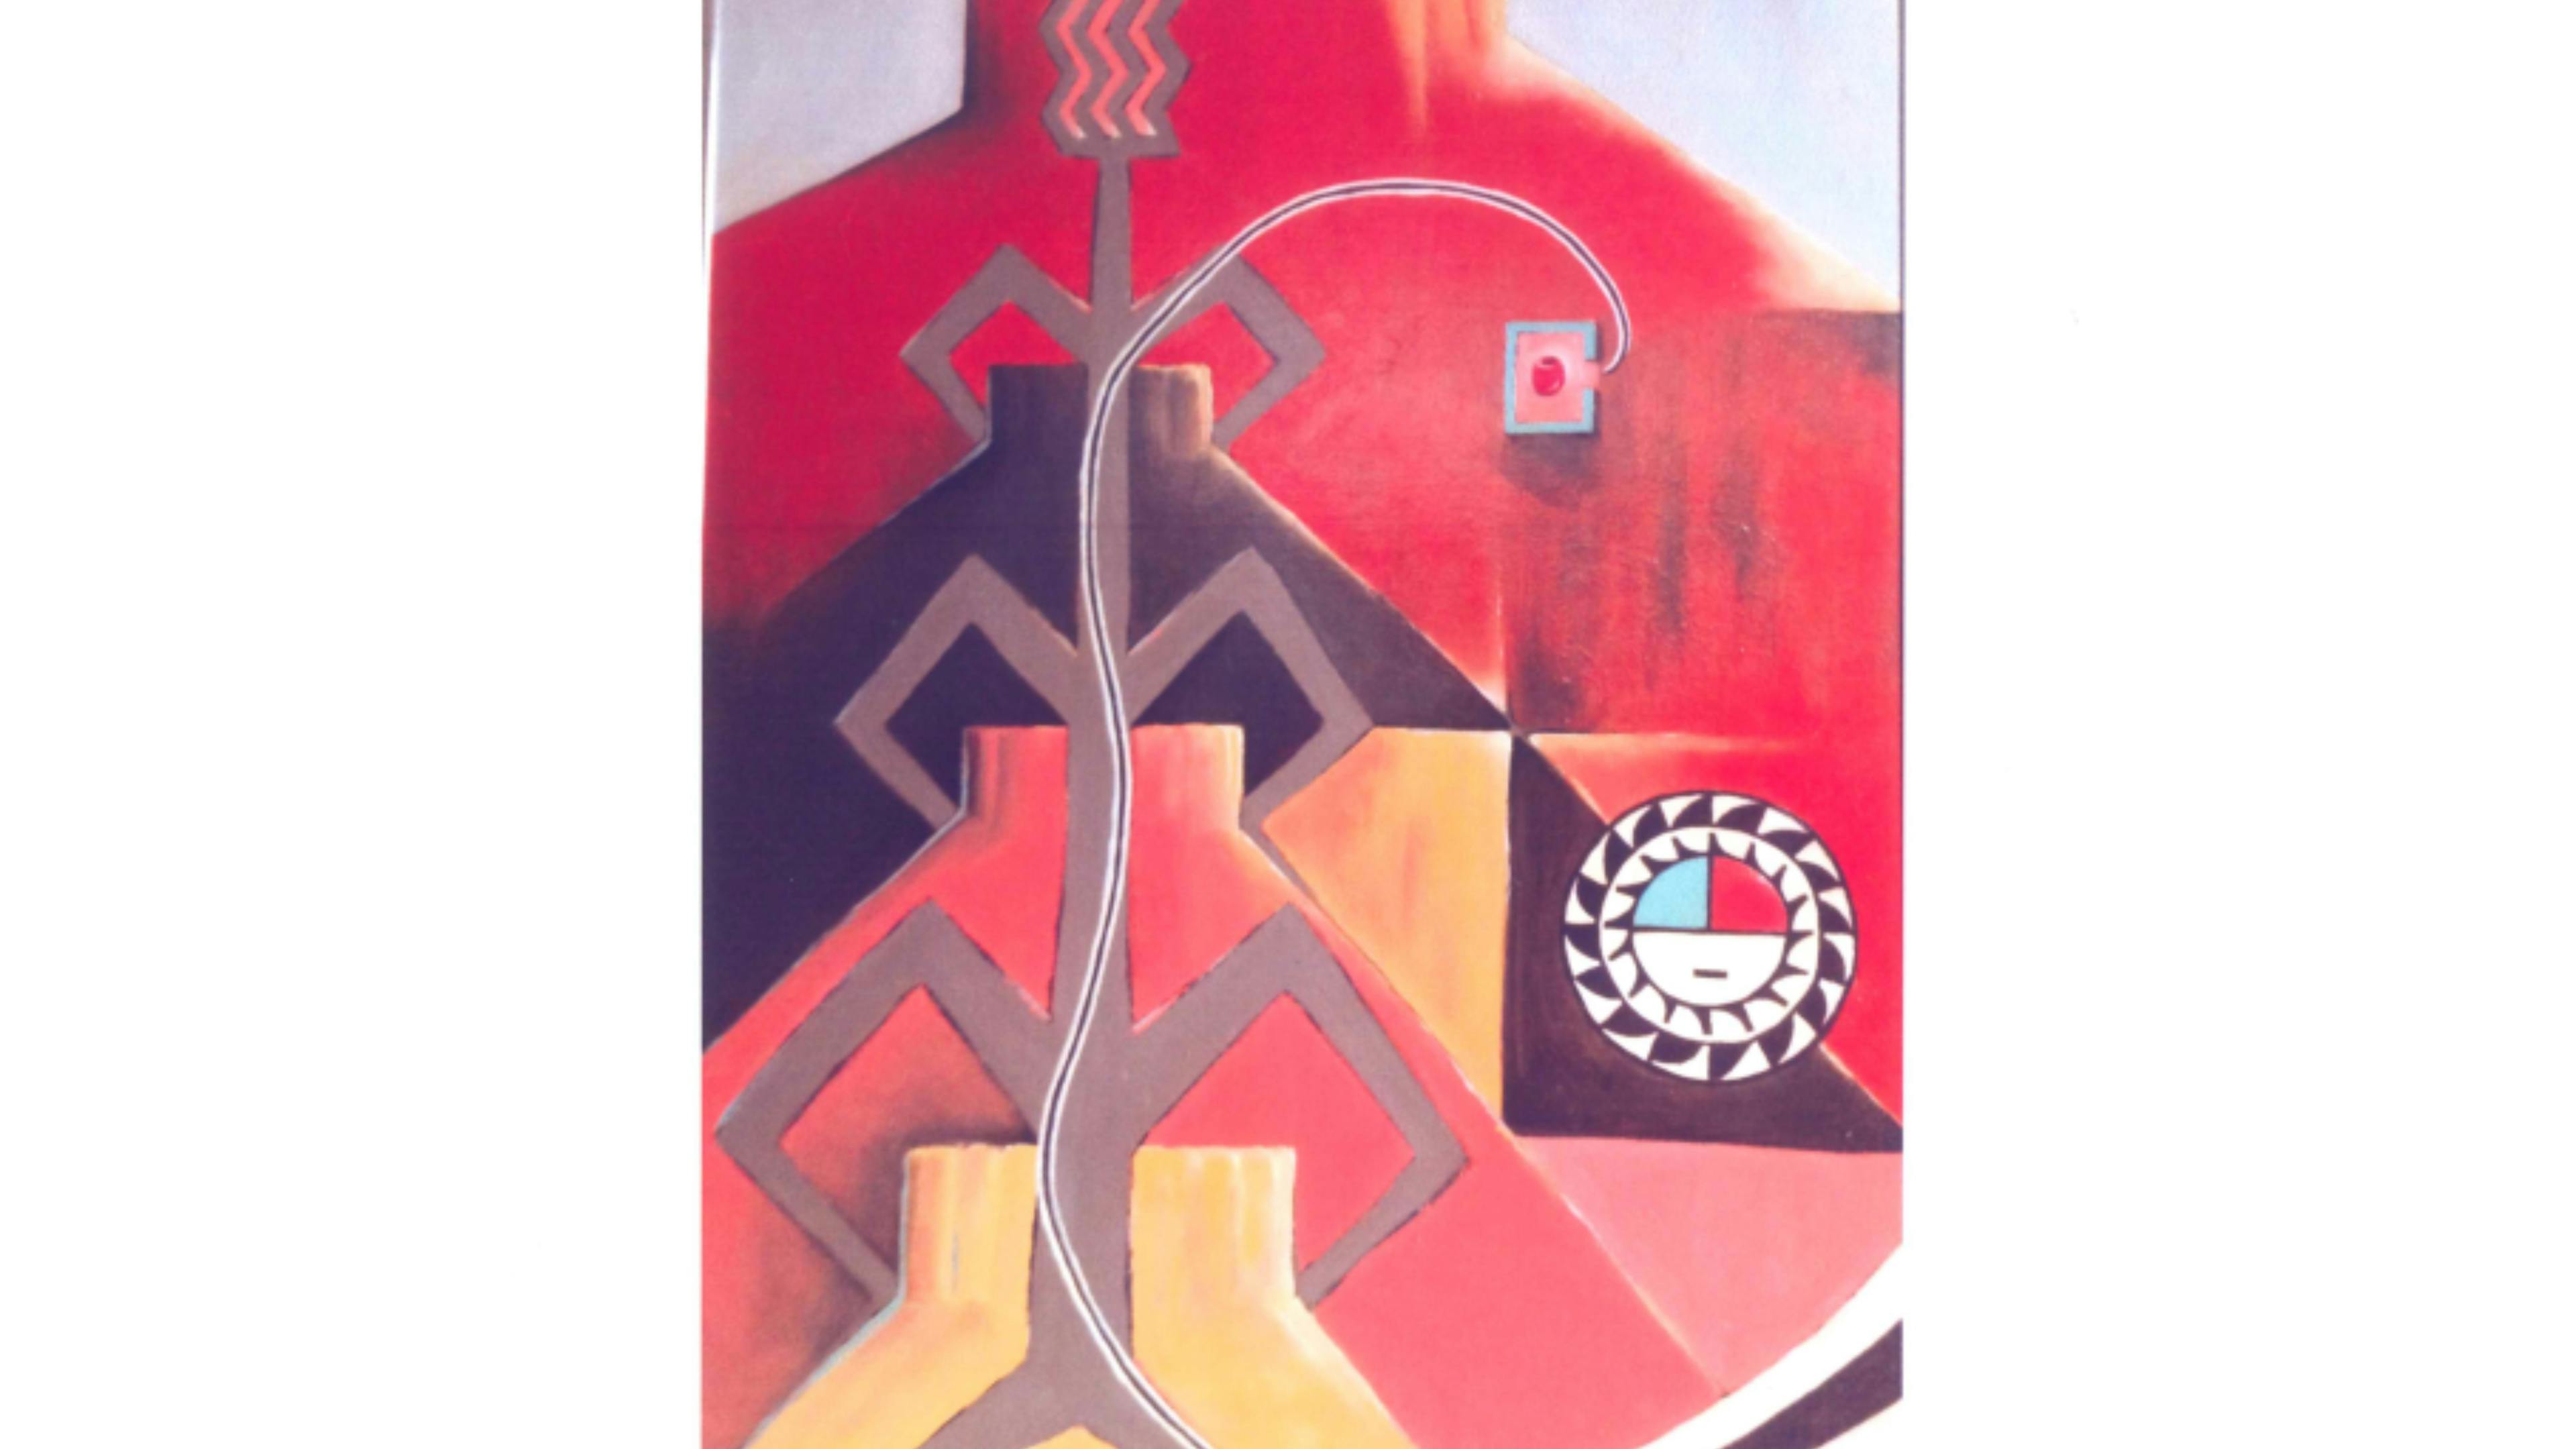 This southwestern corn scene has lots of reds, oranges, yellows and black, all depicted in the form of an abstracted cornstalk. Within this image is a road that leads from the red bead in the small turquoise box onto the next painting, passing by the zuni sun symbol.